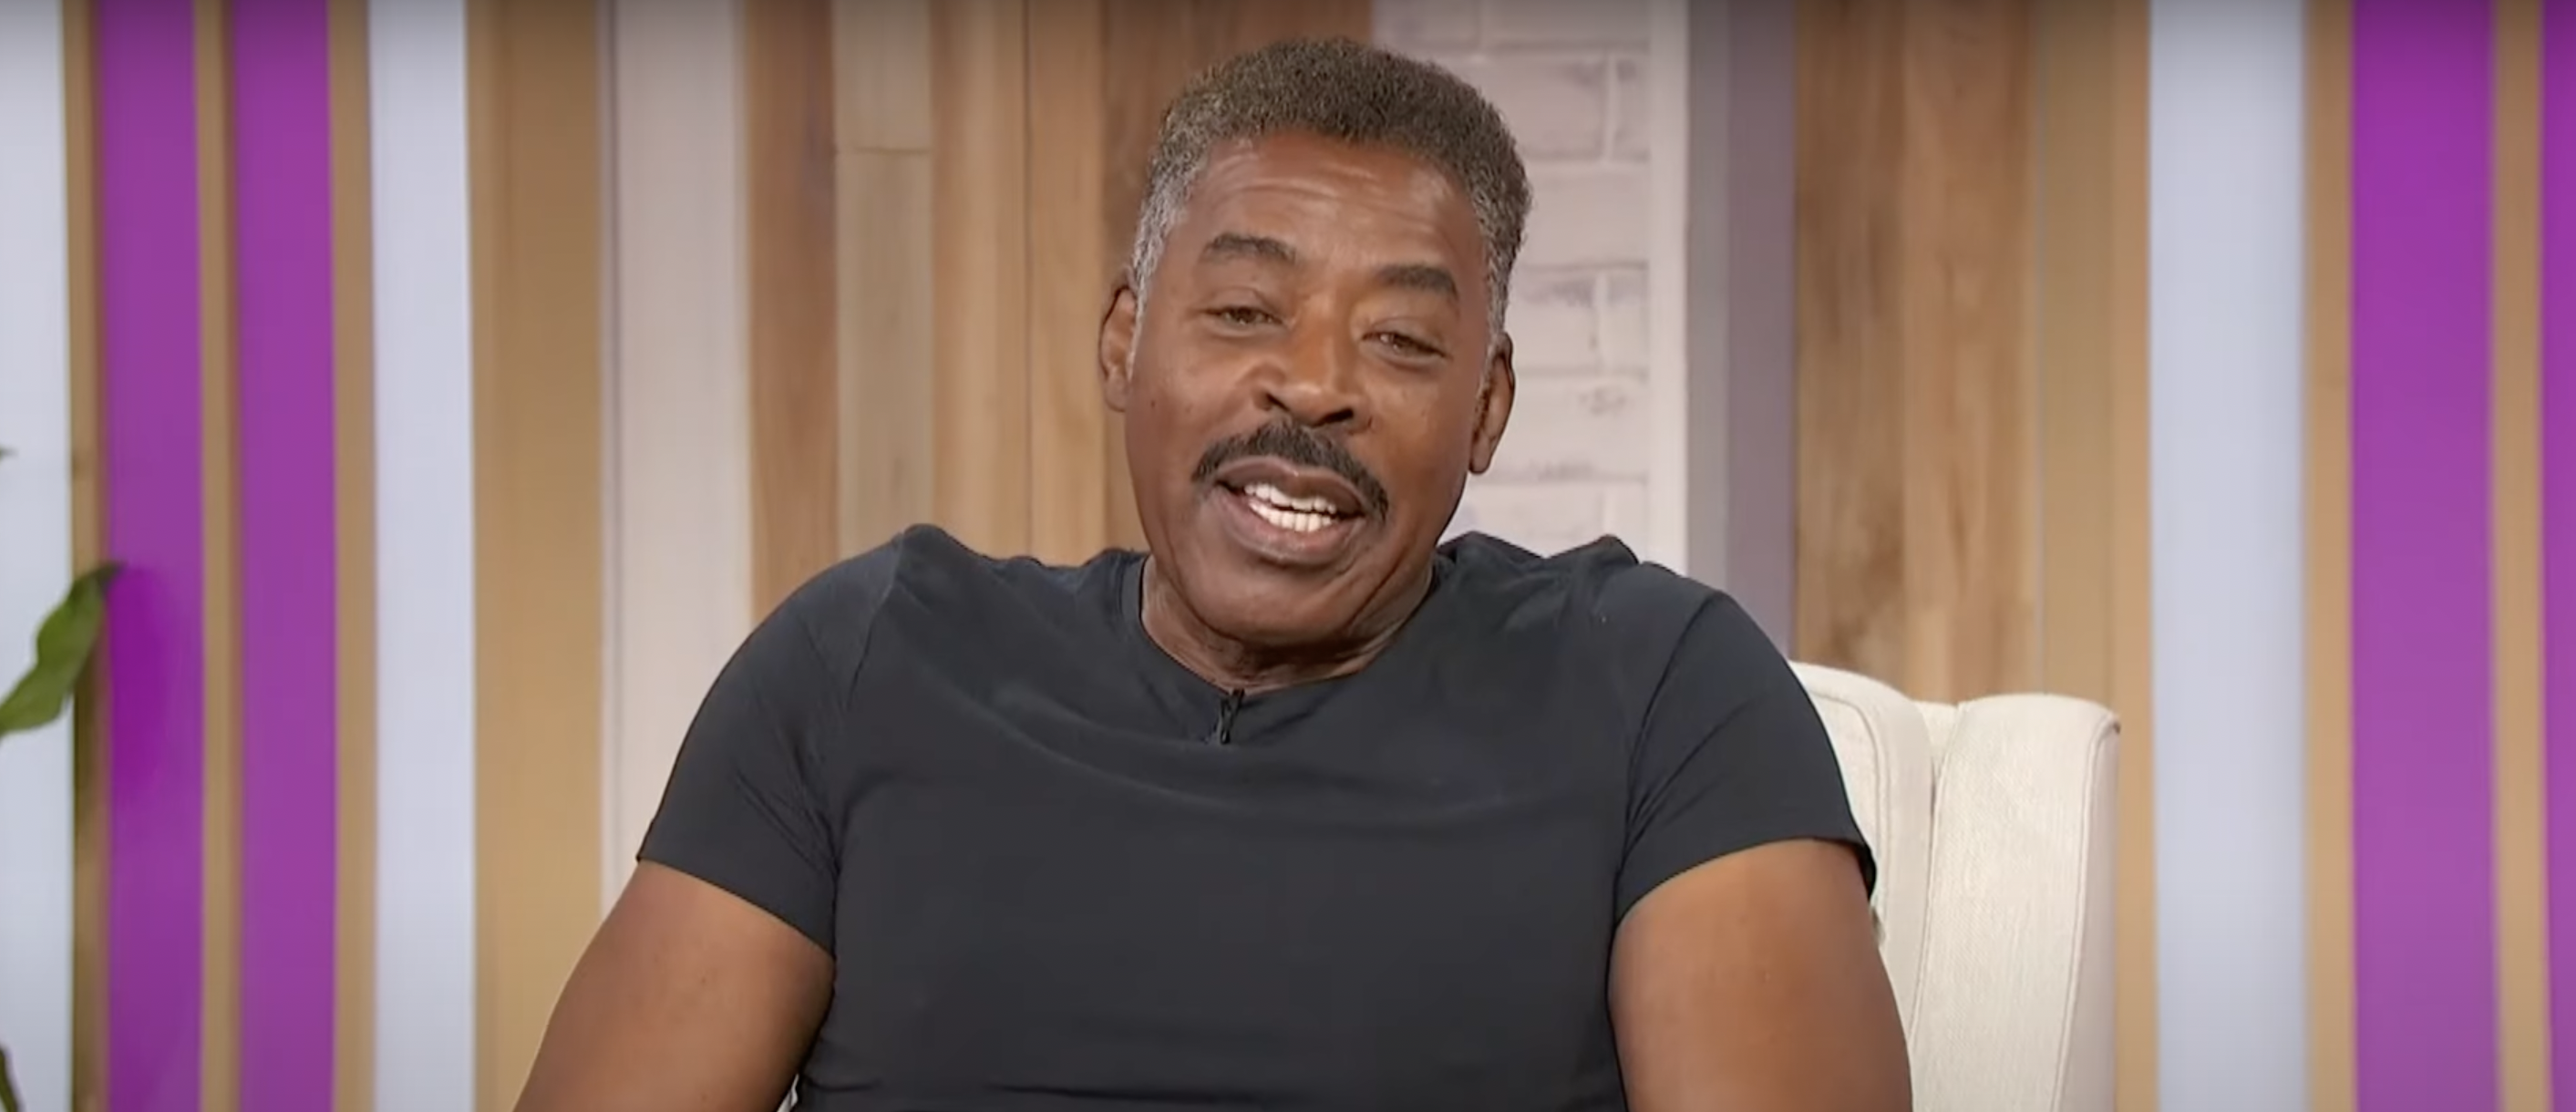 People Can’t Believe How Old Ernie Hudson Is After Stunning Red Carpet Appearance